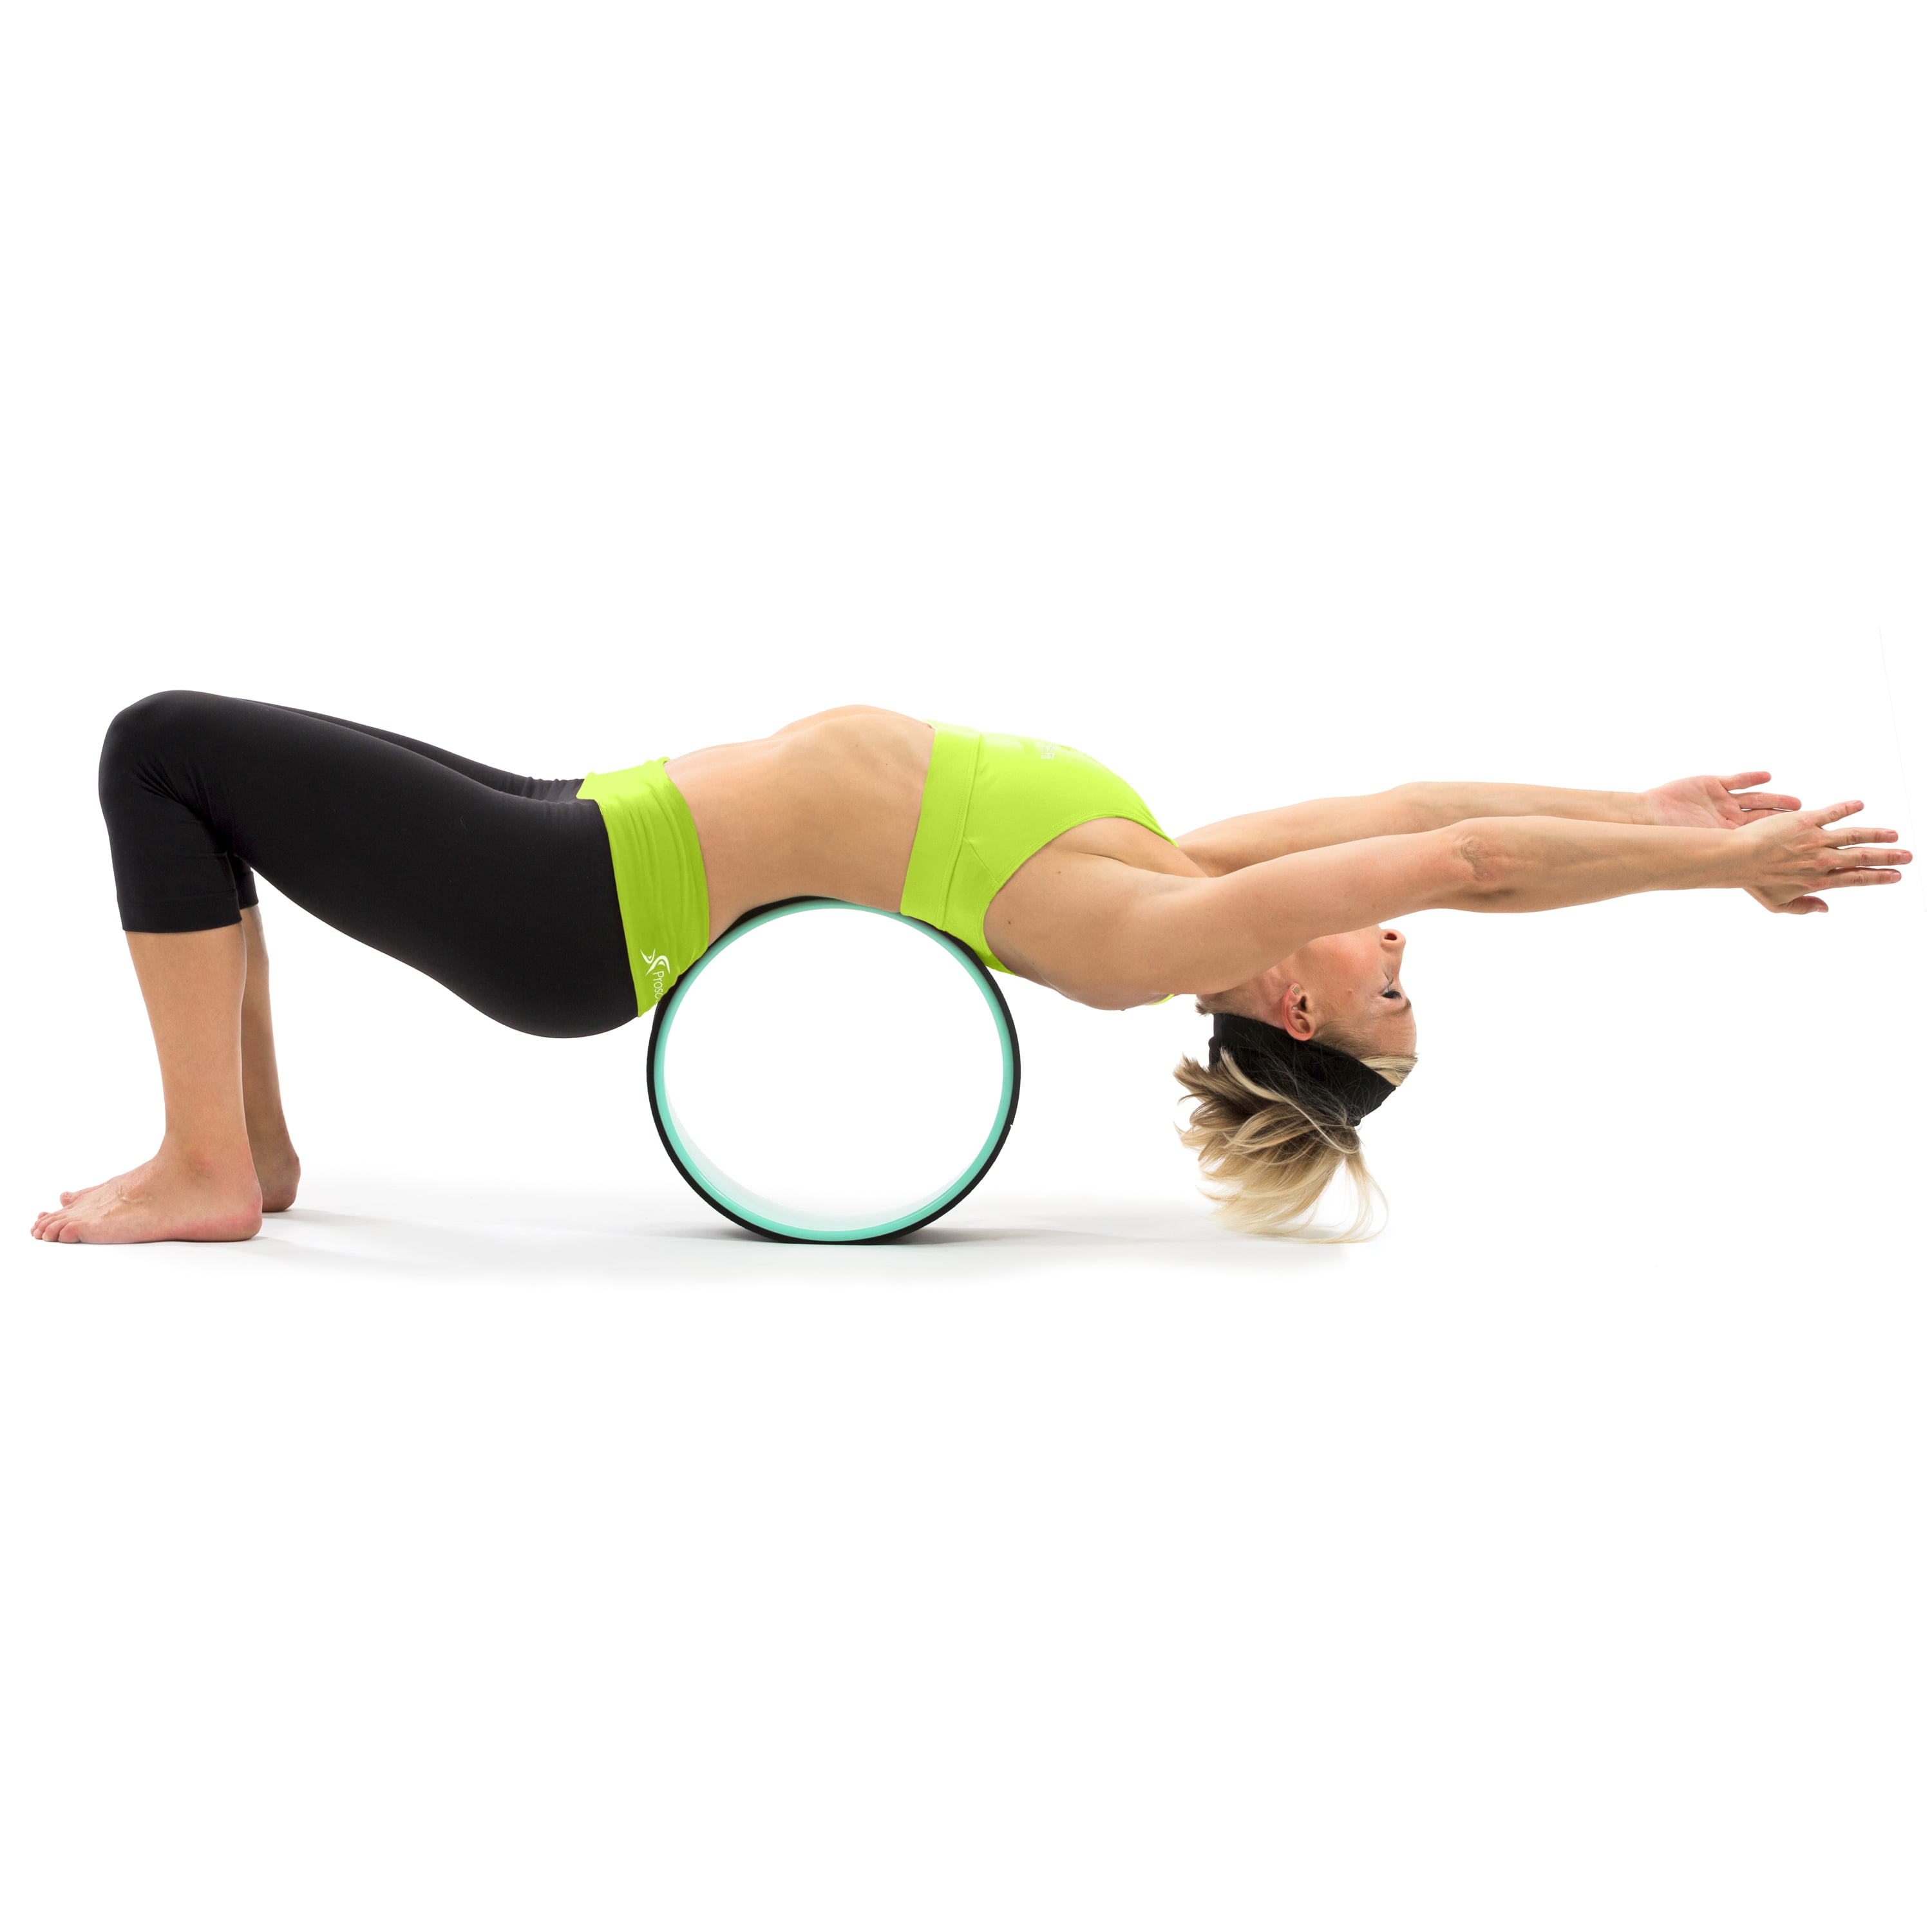 Forbidden Road Yoga Wheel Exercise Wheel Prop for Release Tight Chest and Shoulders Deepen Back Bend Stretching and Improving Yoga Poses and Flexibility Balance and Core Strength